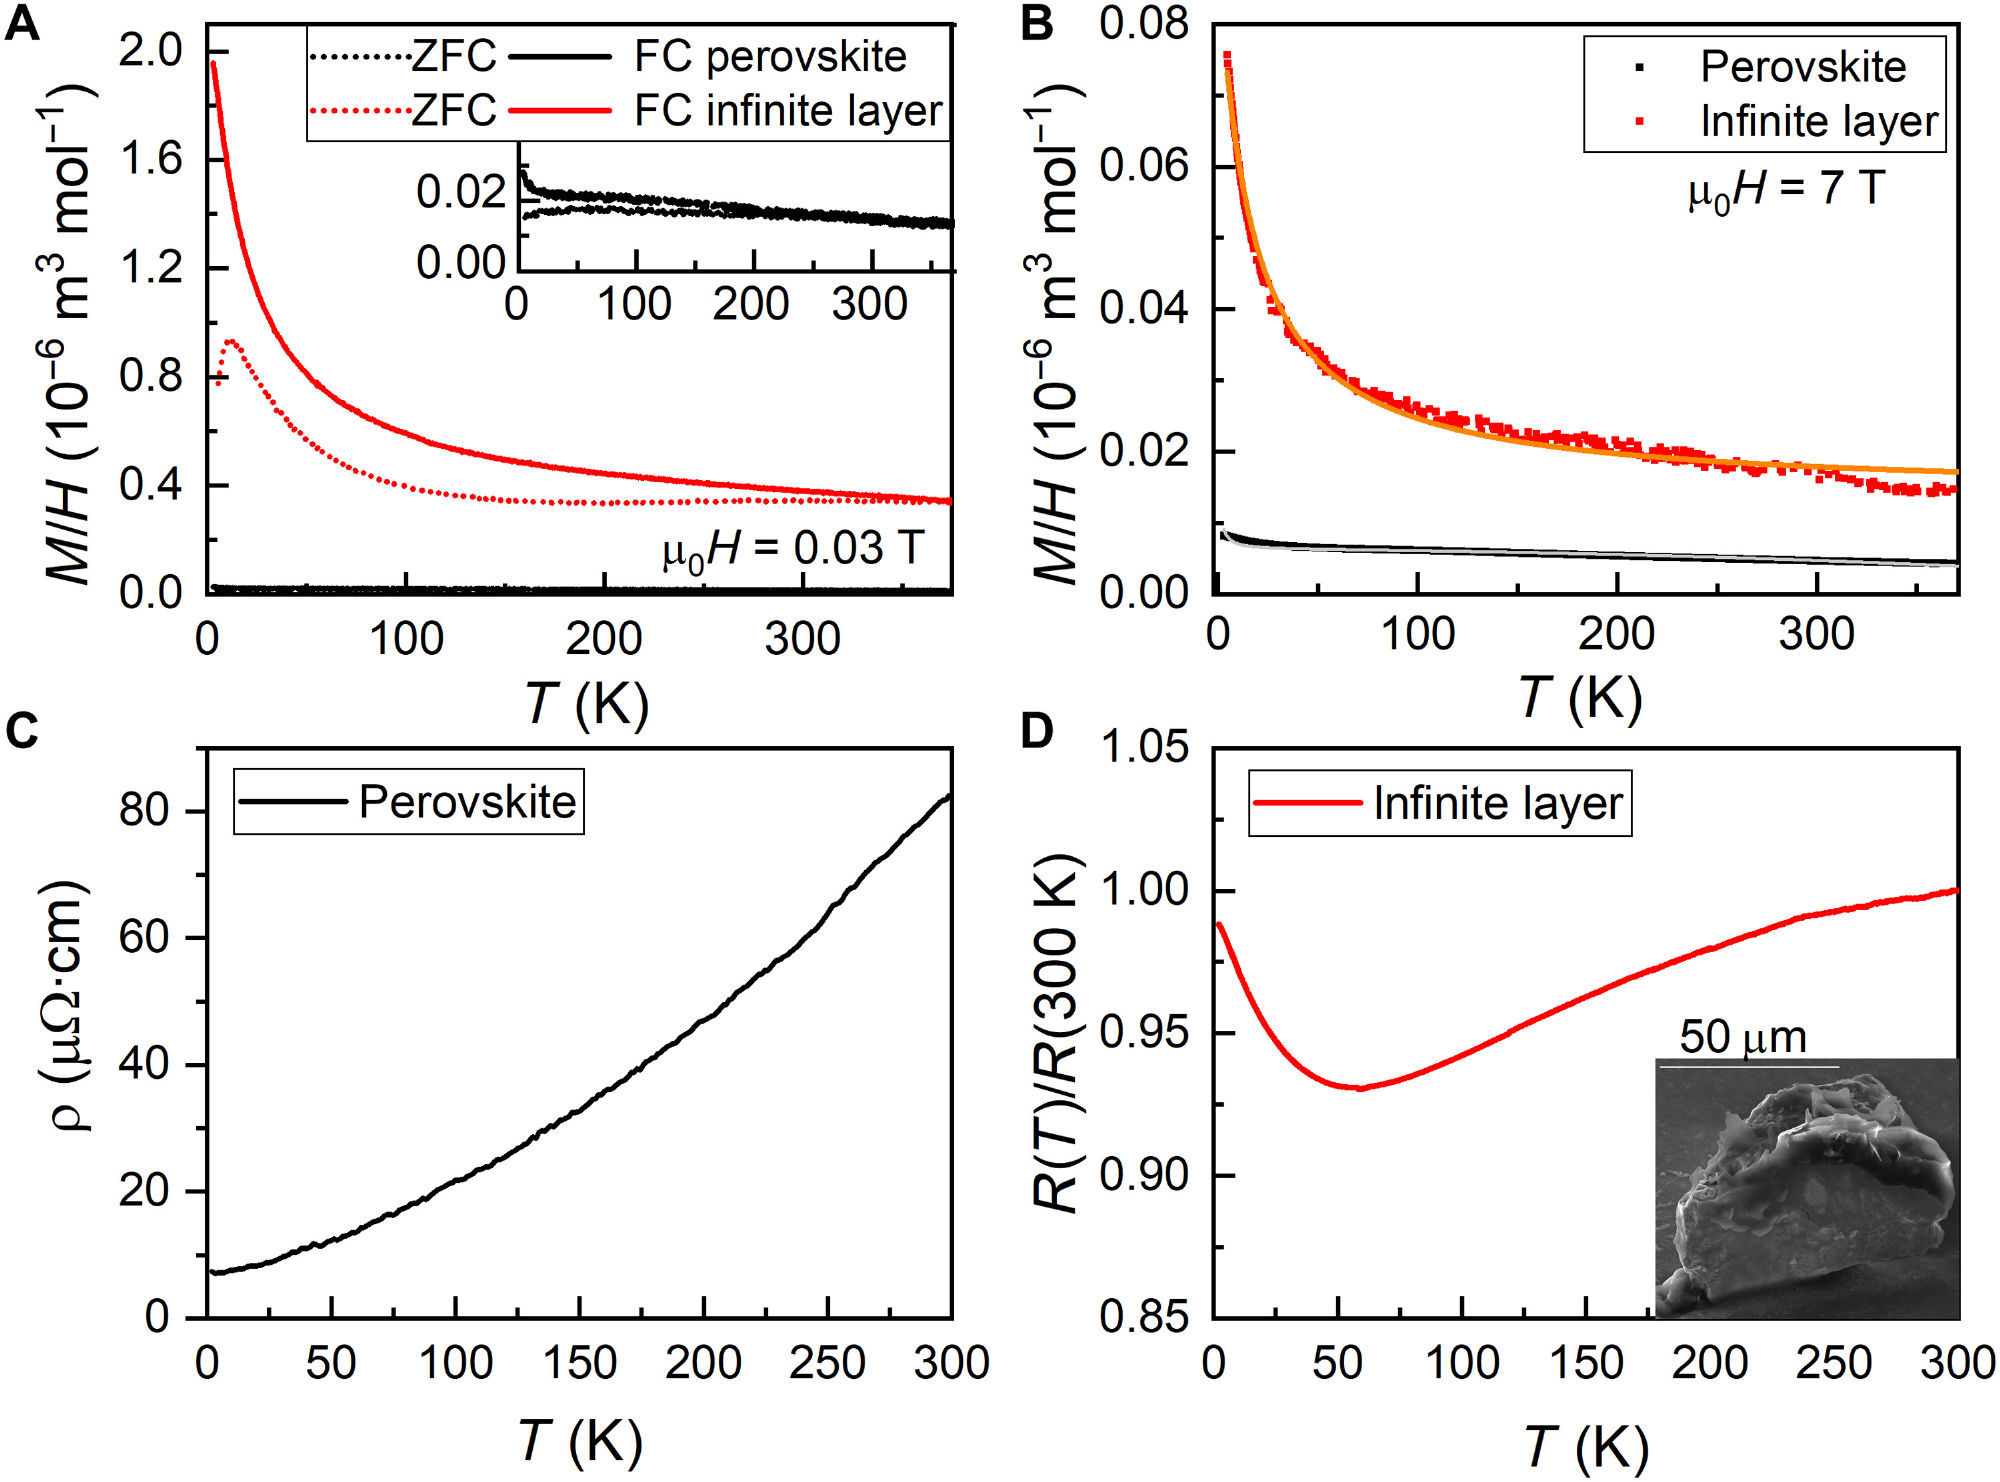 Magnetic properties and electrical transport. (A) Magnetic susceptibility of an as-grown perovskite (black) and a reduced (red) crystal measured upon zero field cooling (ZFC, dotted lines) and field cooling (FC, solid lines) in a small external field of 0.03 T. (B) Susceptibility in a strong field of 7 T. The solid gray and orange lines are fits with a Curie-type law (see text). (C) Resistivity of a perovskite single crystal [x = 0.07(2)]. (D) Resistance of a reduced crystal [x = 0.08(2)] normalized to the room temperature value. The inset shows an SEM-SE image of a fragment of the infinite-layer crystal used in both the electrical transport and STEM measurements.